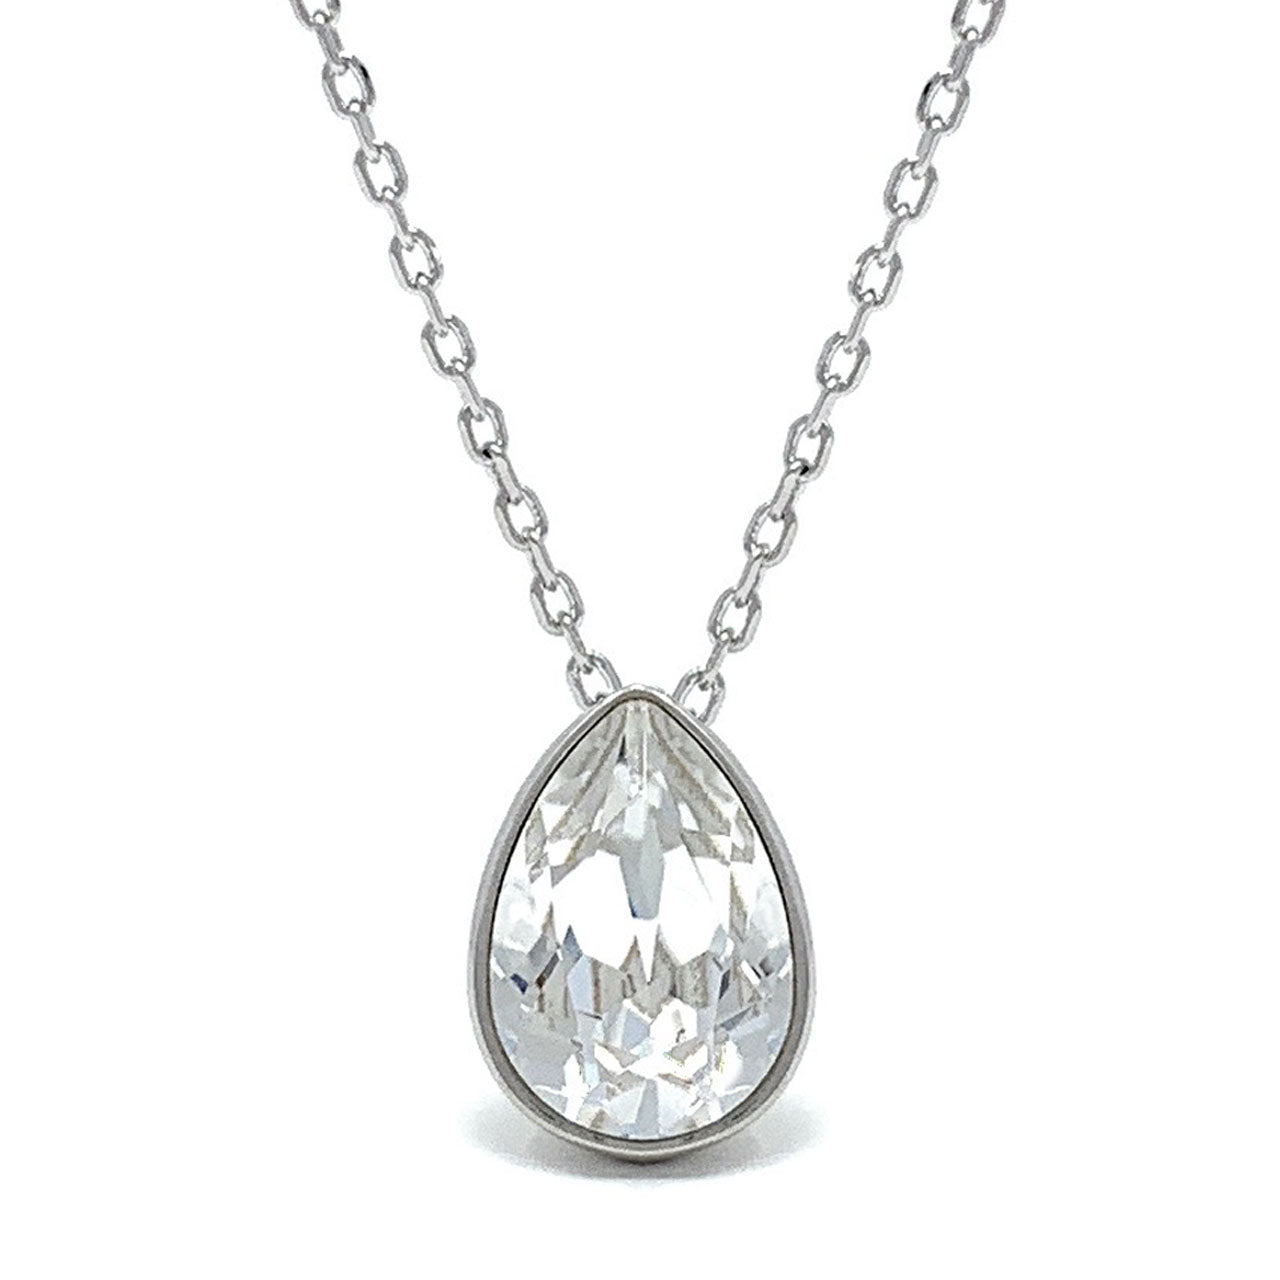 Mary Pendant Necklace with White Clear Drop Crystals from Swarovski Silver Toned Rhodium Plated - Ed Heart